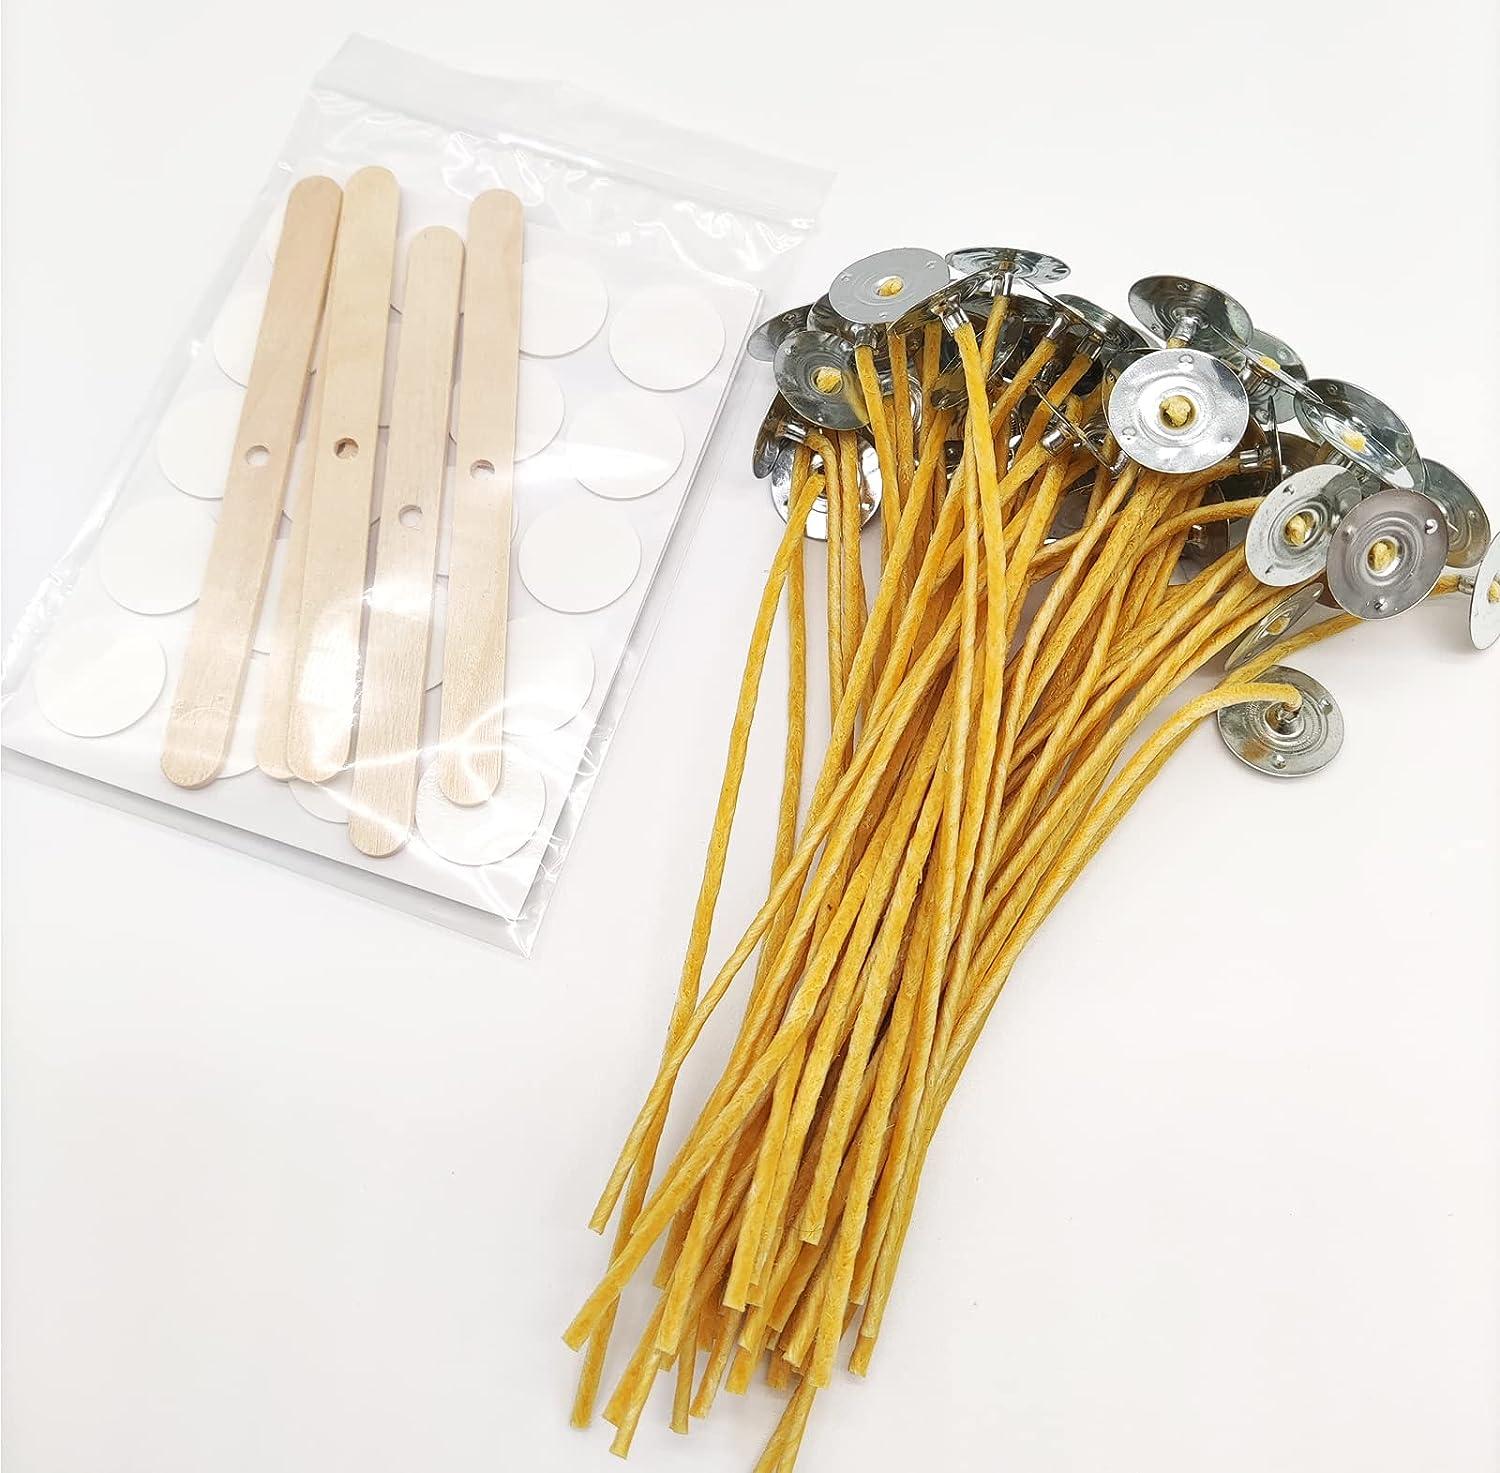 50 Pcs wicks for candlemaking Lamp Burner Wicks Candle Wick